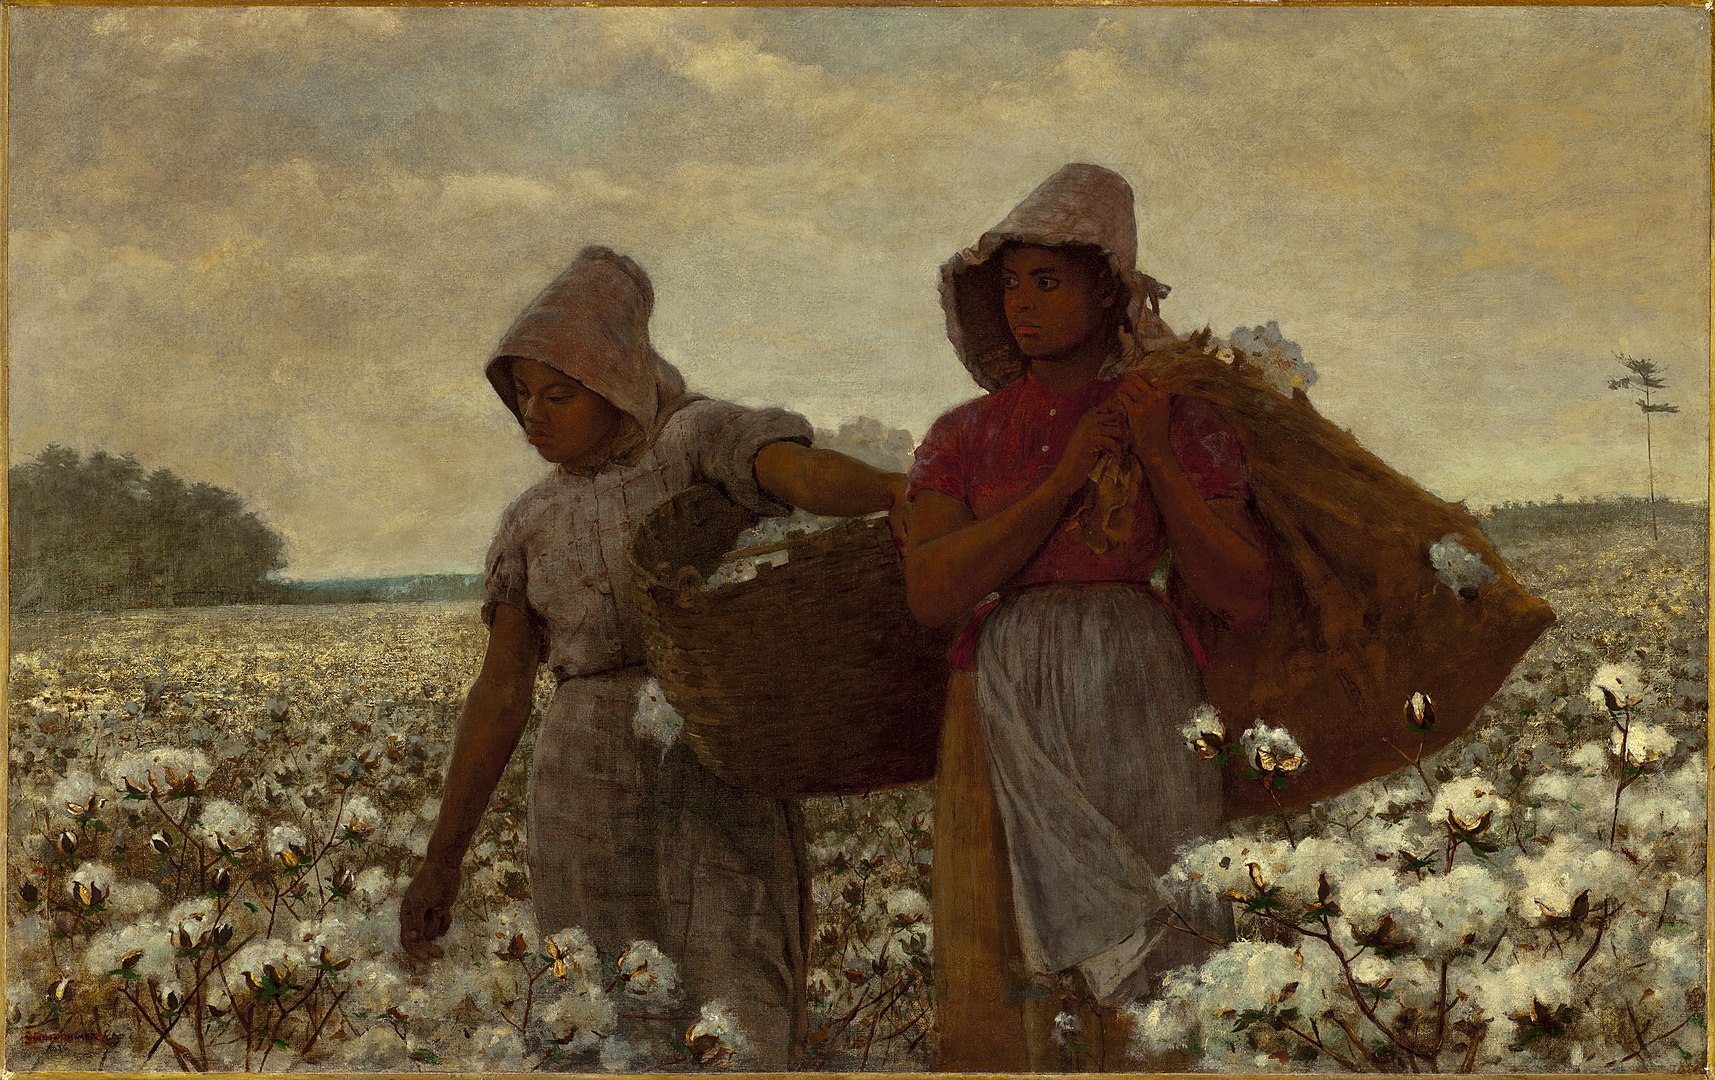 Two young women travel through a field of cotton under a cloudy sky.